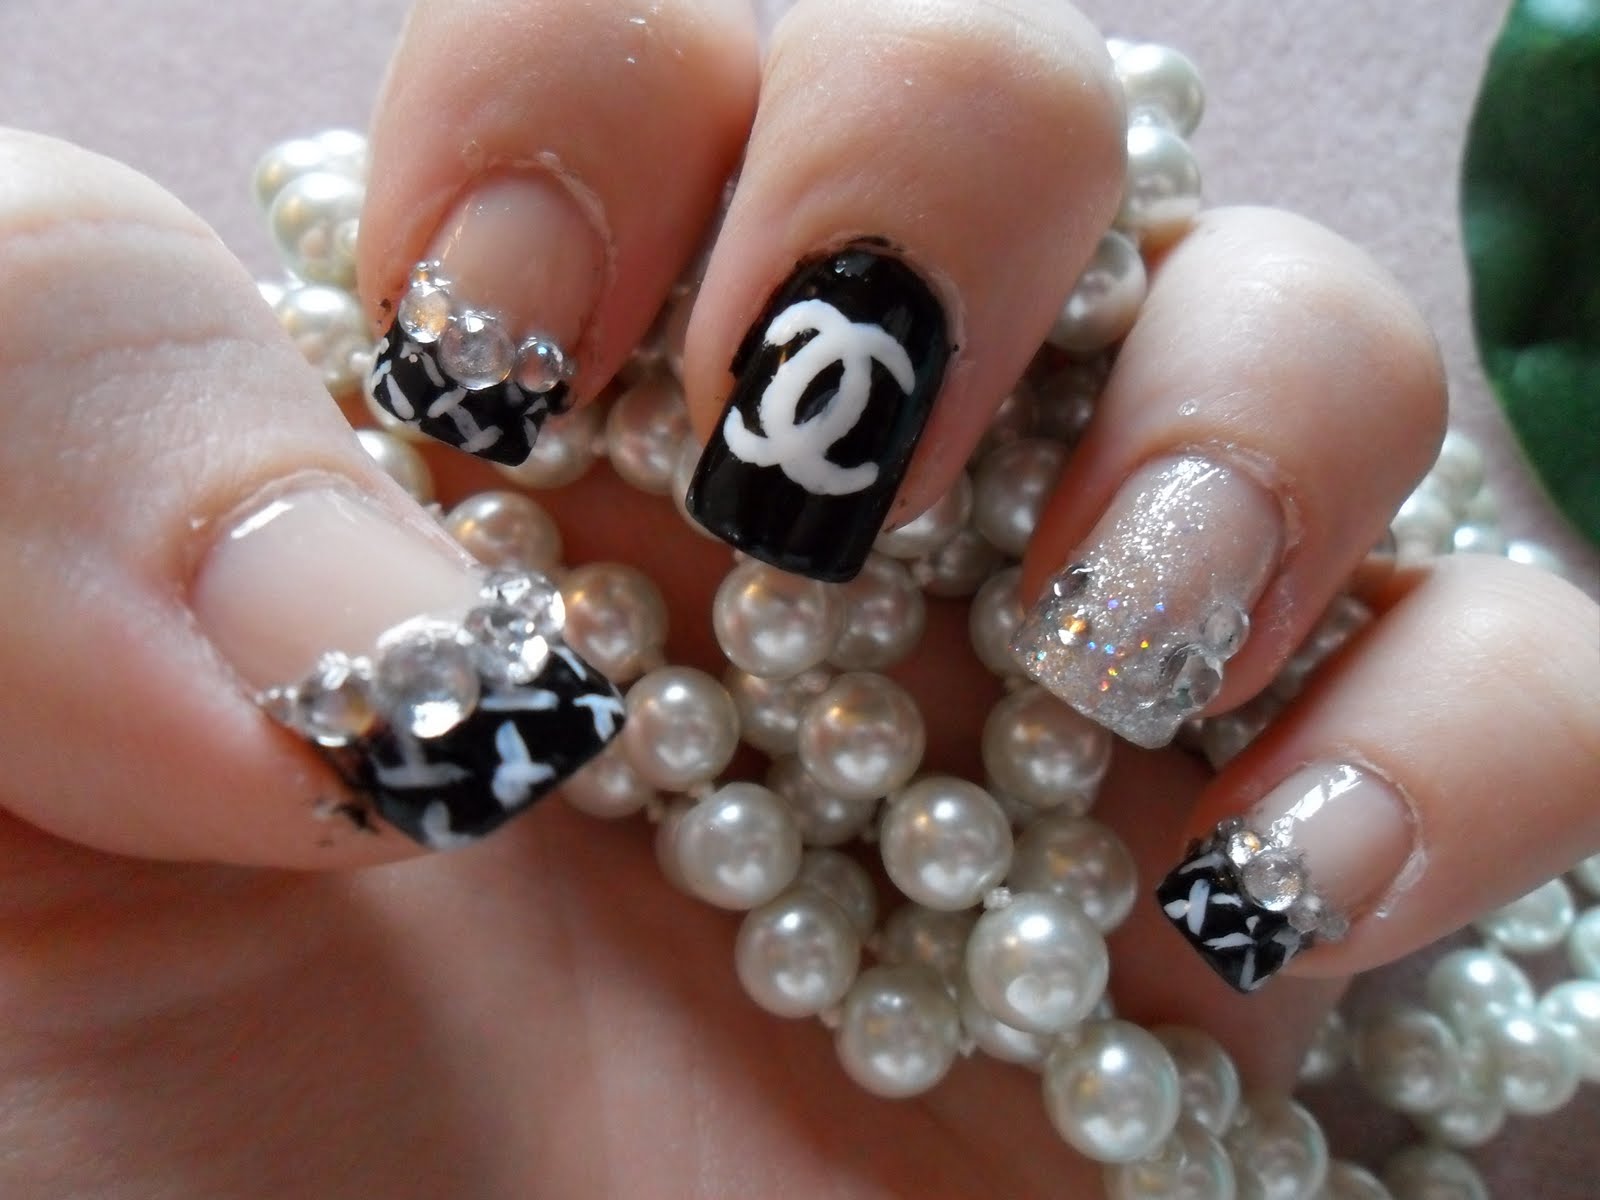 1. Chanel-inspired French manicure - wide 7